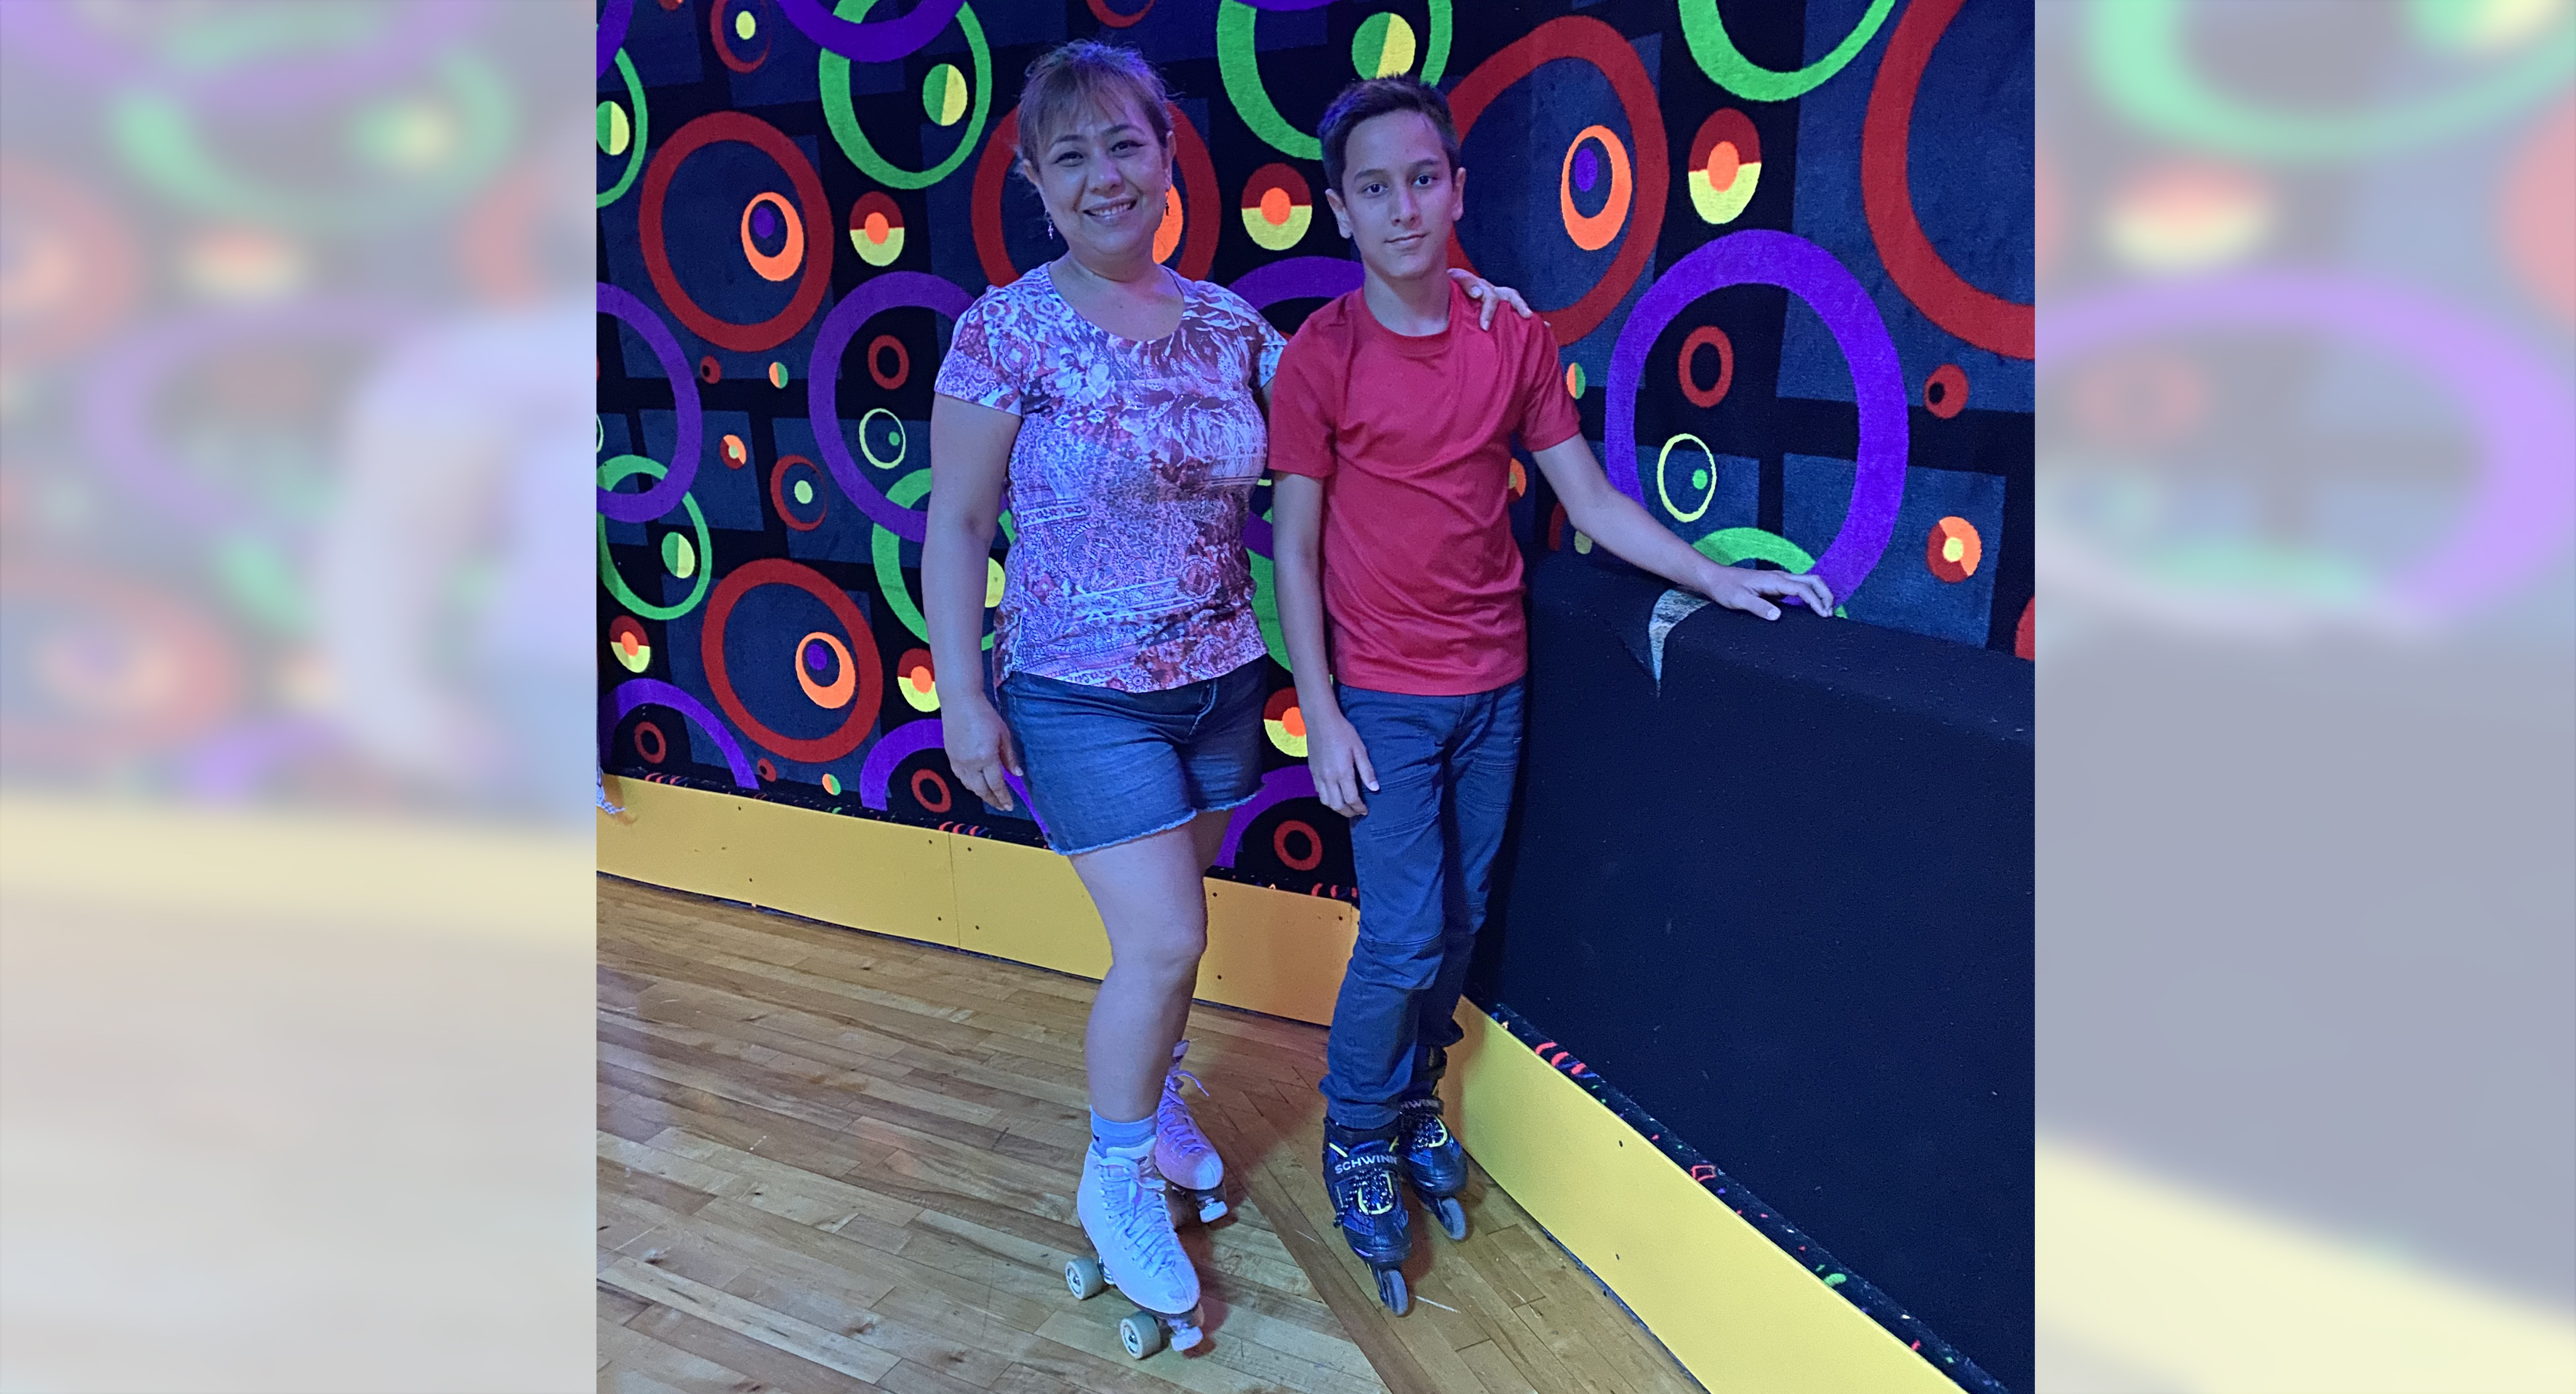 Brenda and her son rollerblading after Brenda receives treatment from k. keyhani